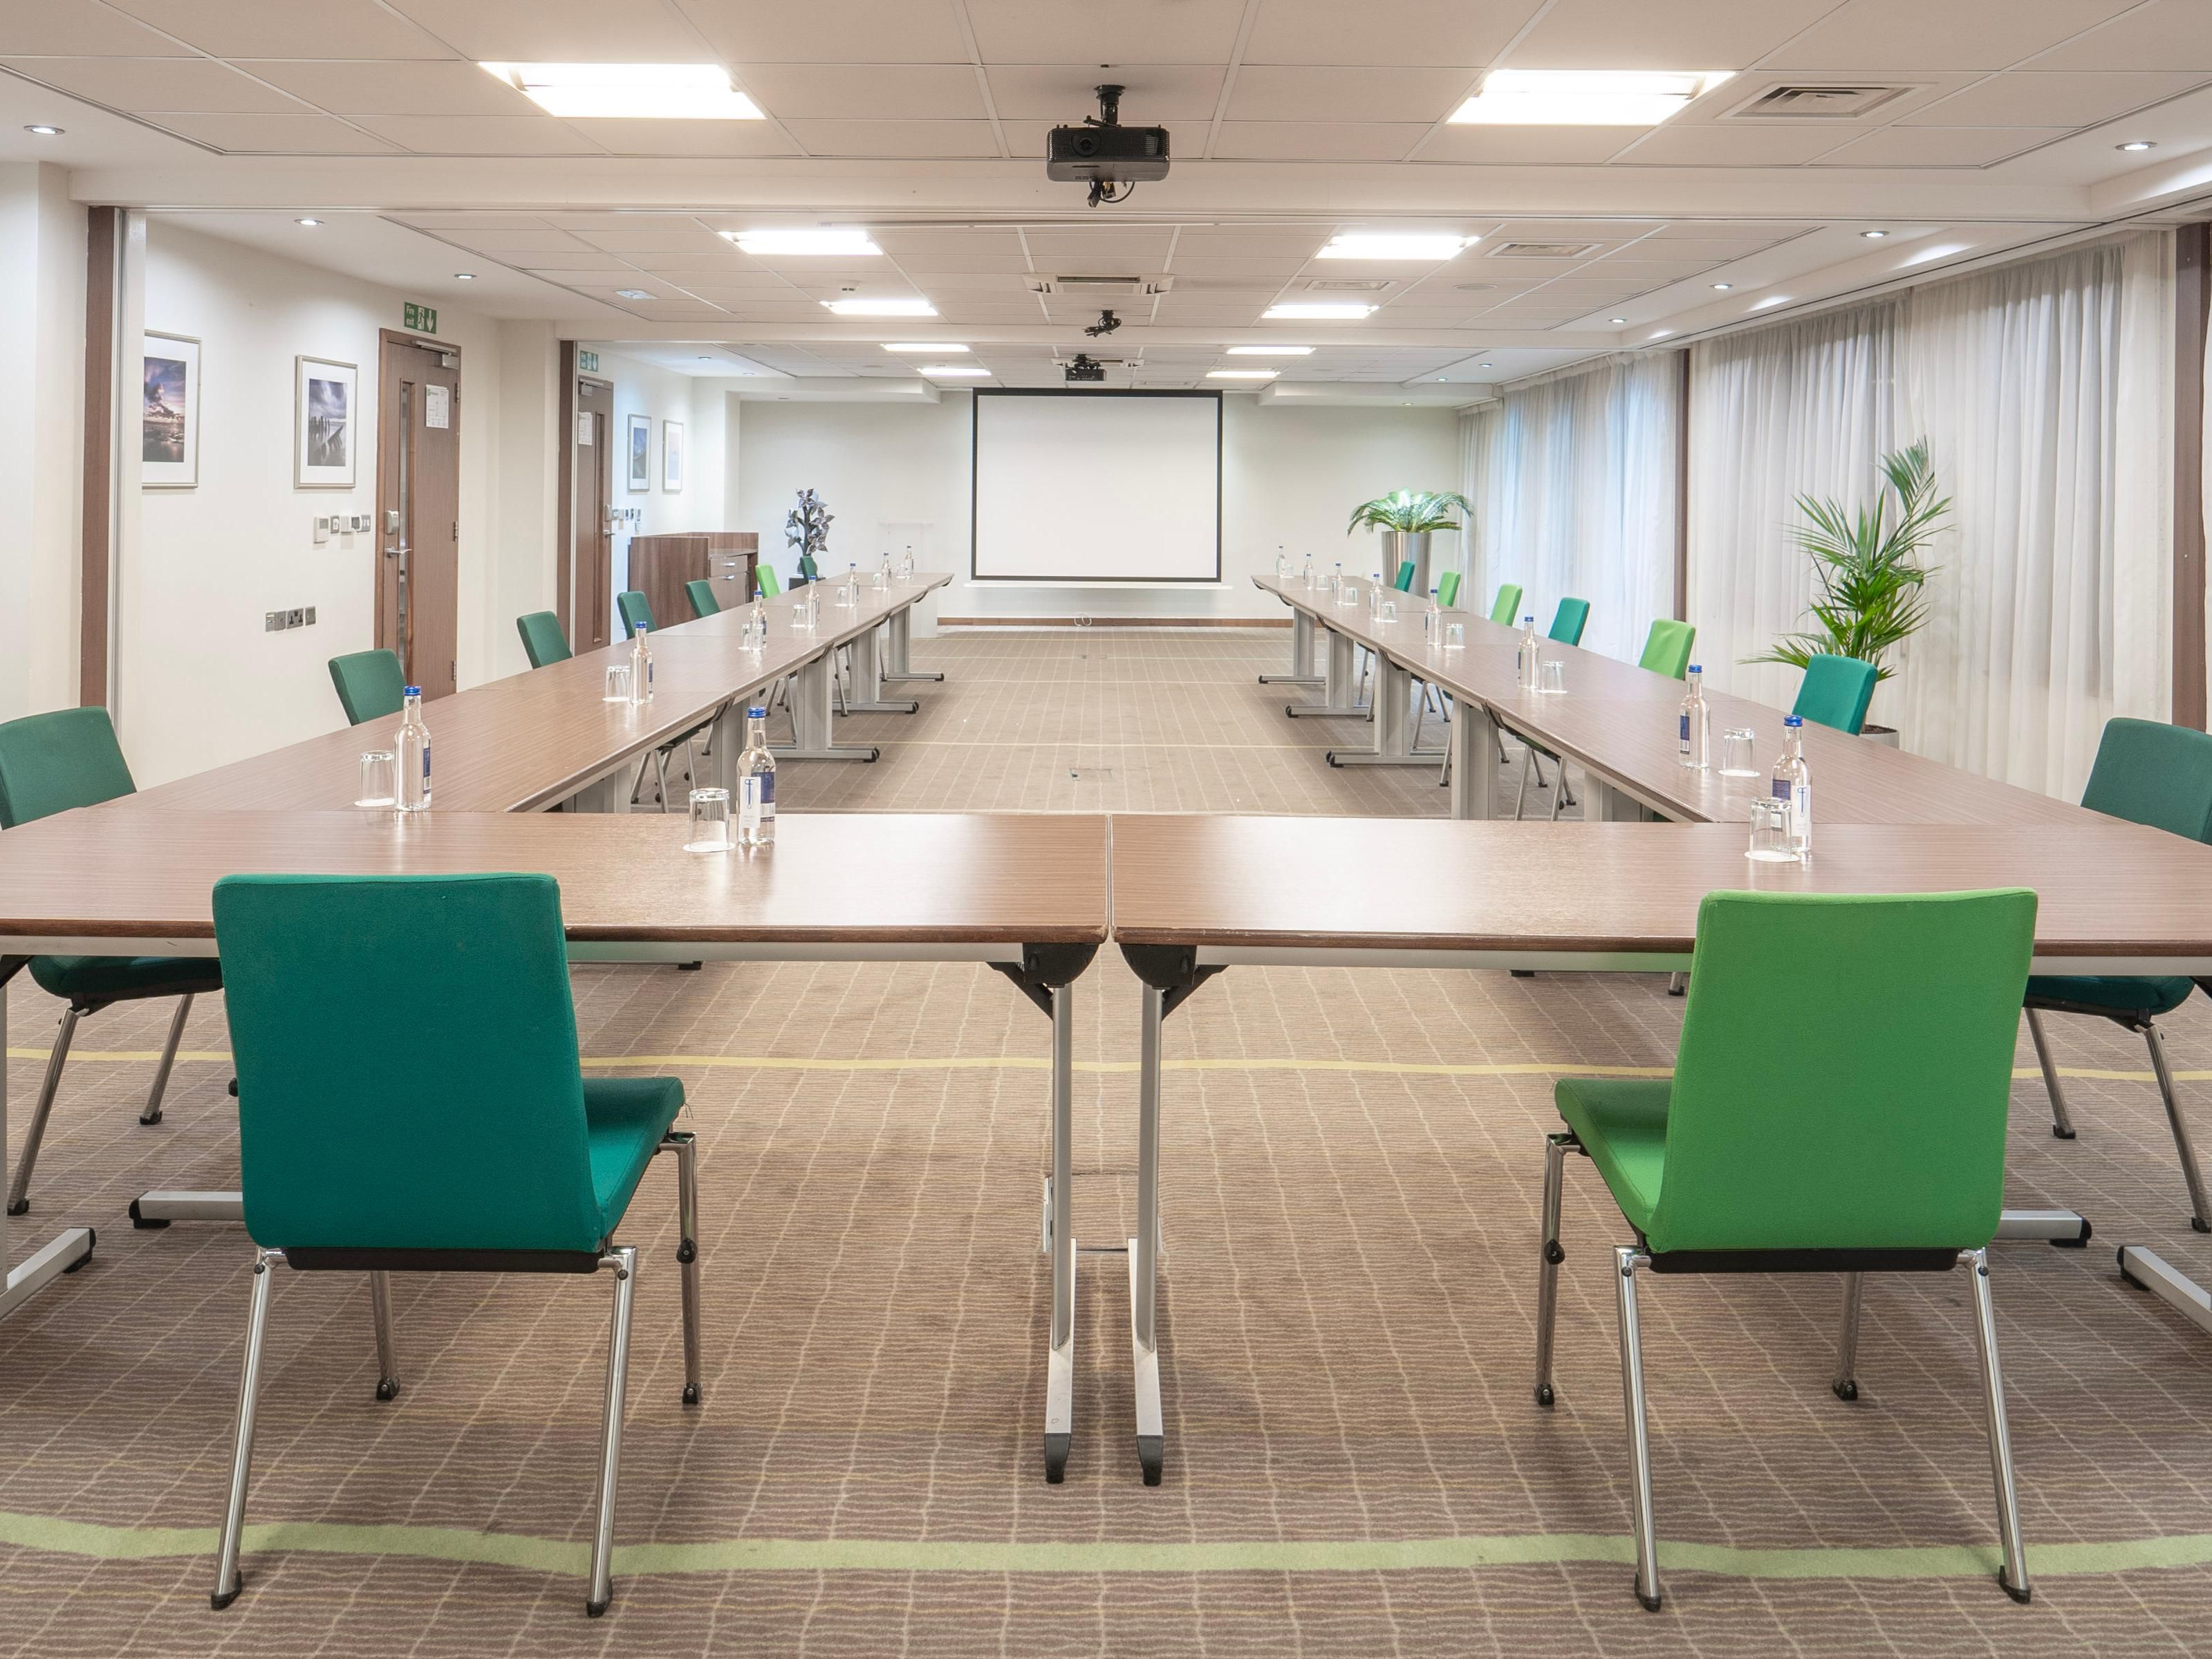 Holiday Inn Bristol City Centre offers 7 flexible naturally lit meeting and event rooms. All are fully accessible and come fully equipped with built-in AV.